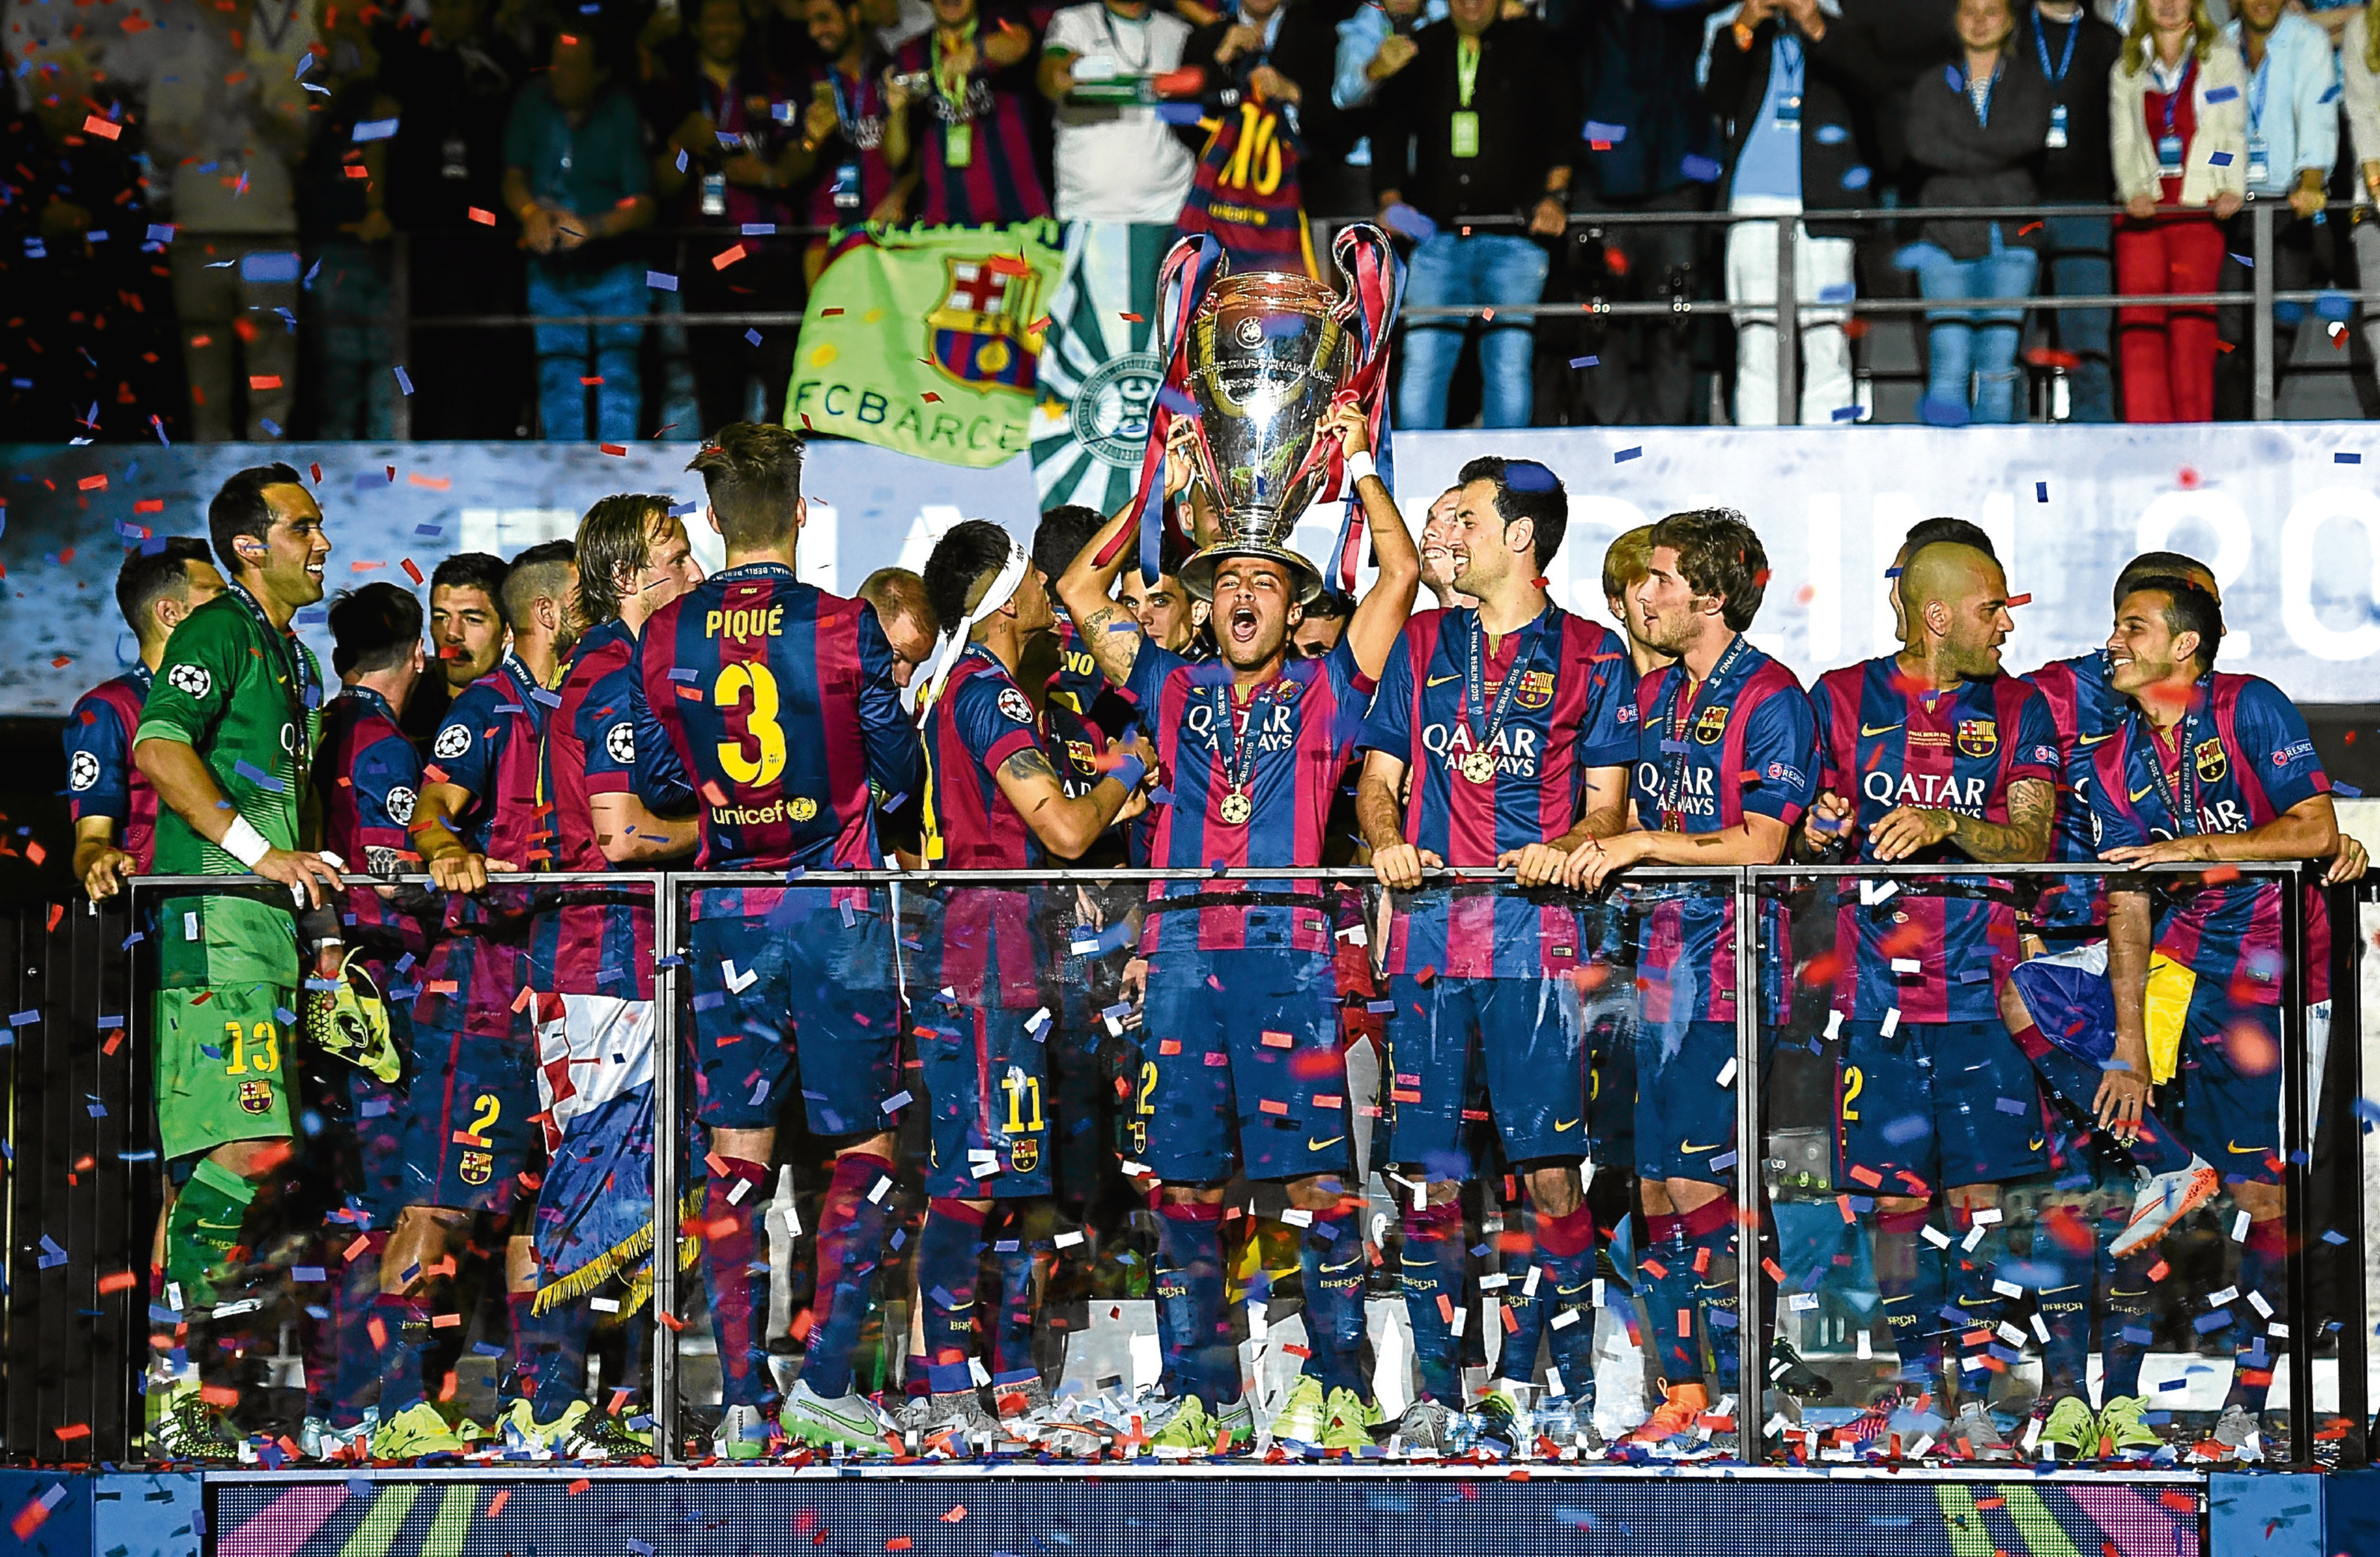 Barcelona lift the 2015 Champions League (Shaun Botterill/Getty Images)